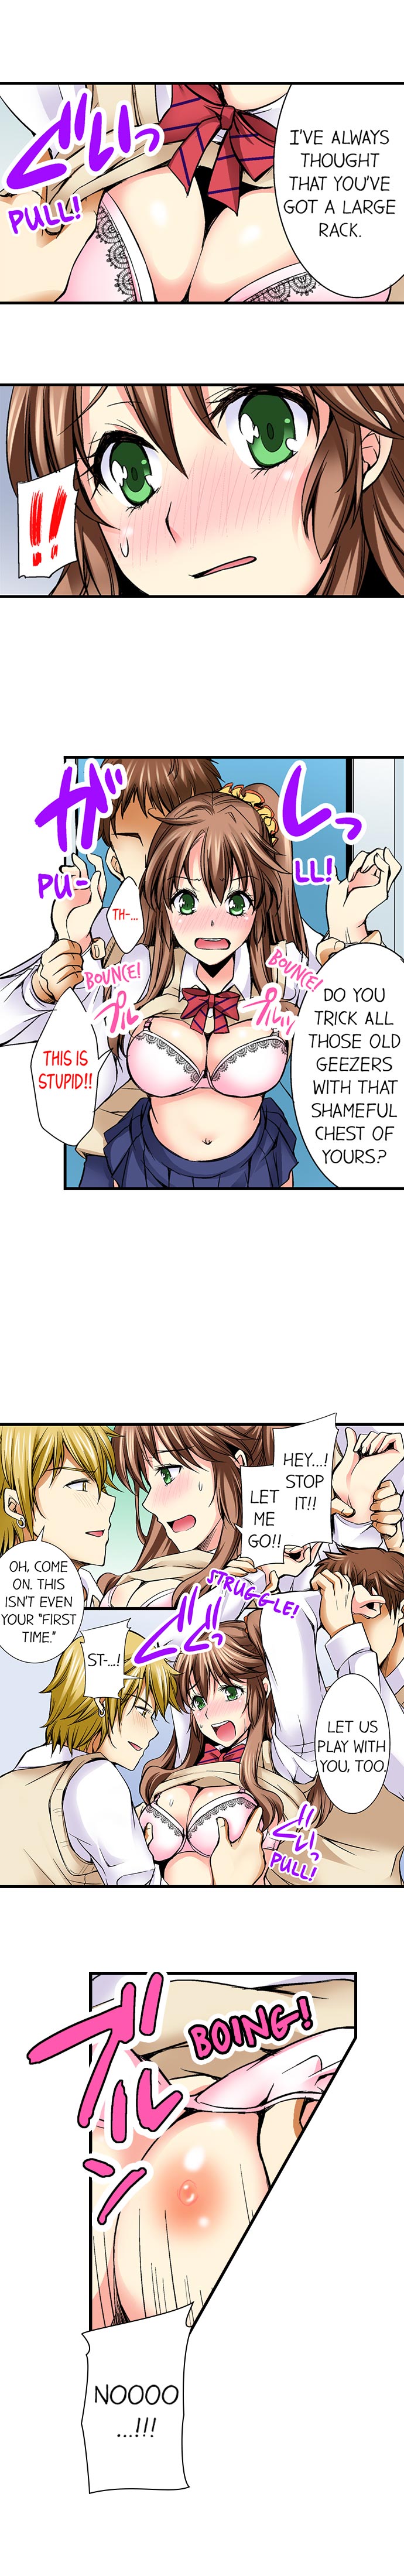 Why Can't i Have Sex With My Teacher? - Chapter 7 Page 9